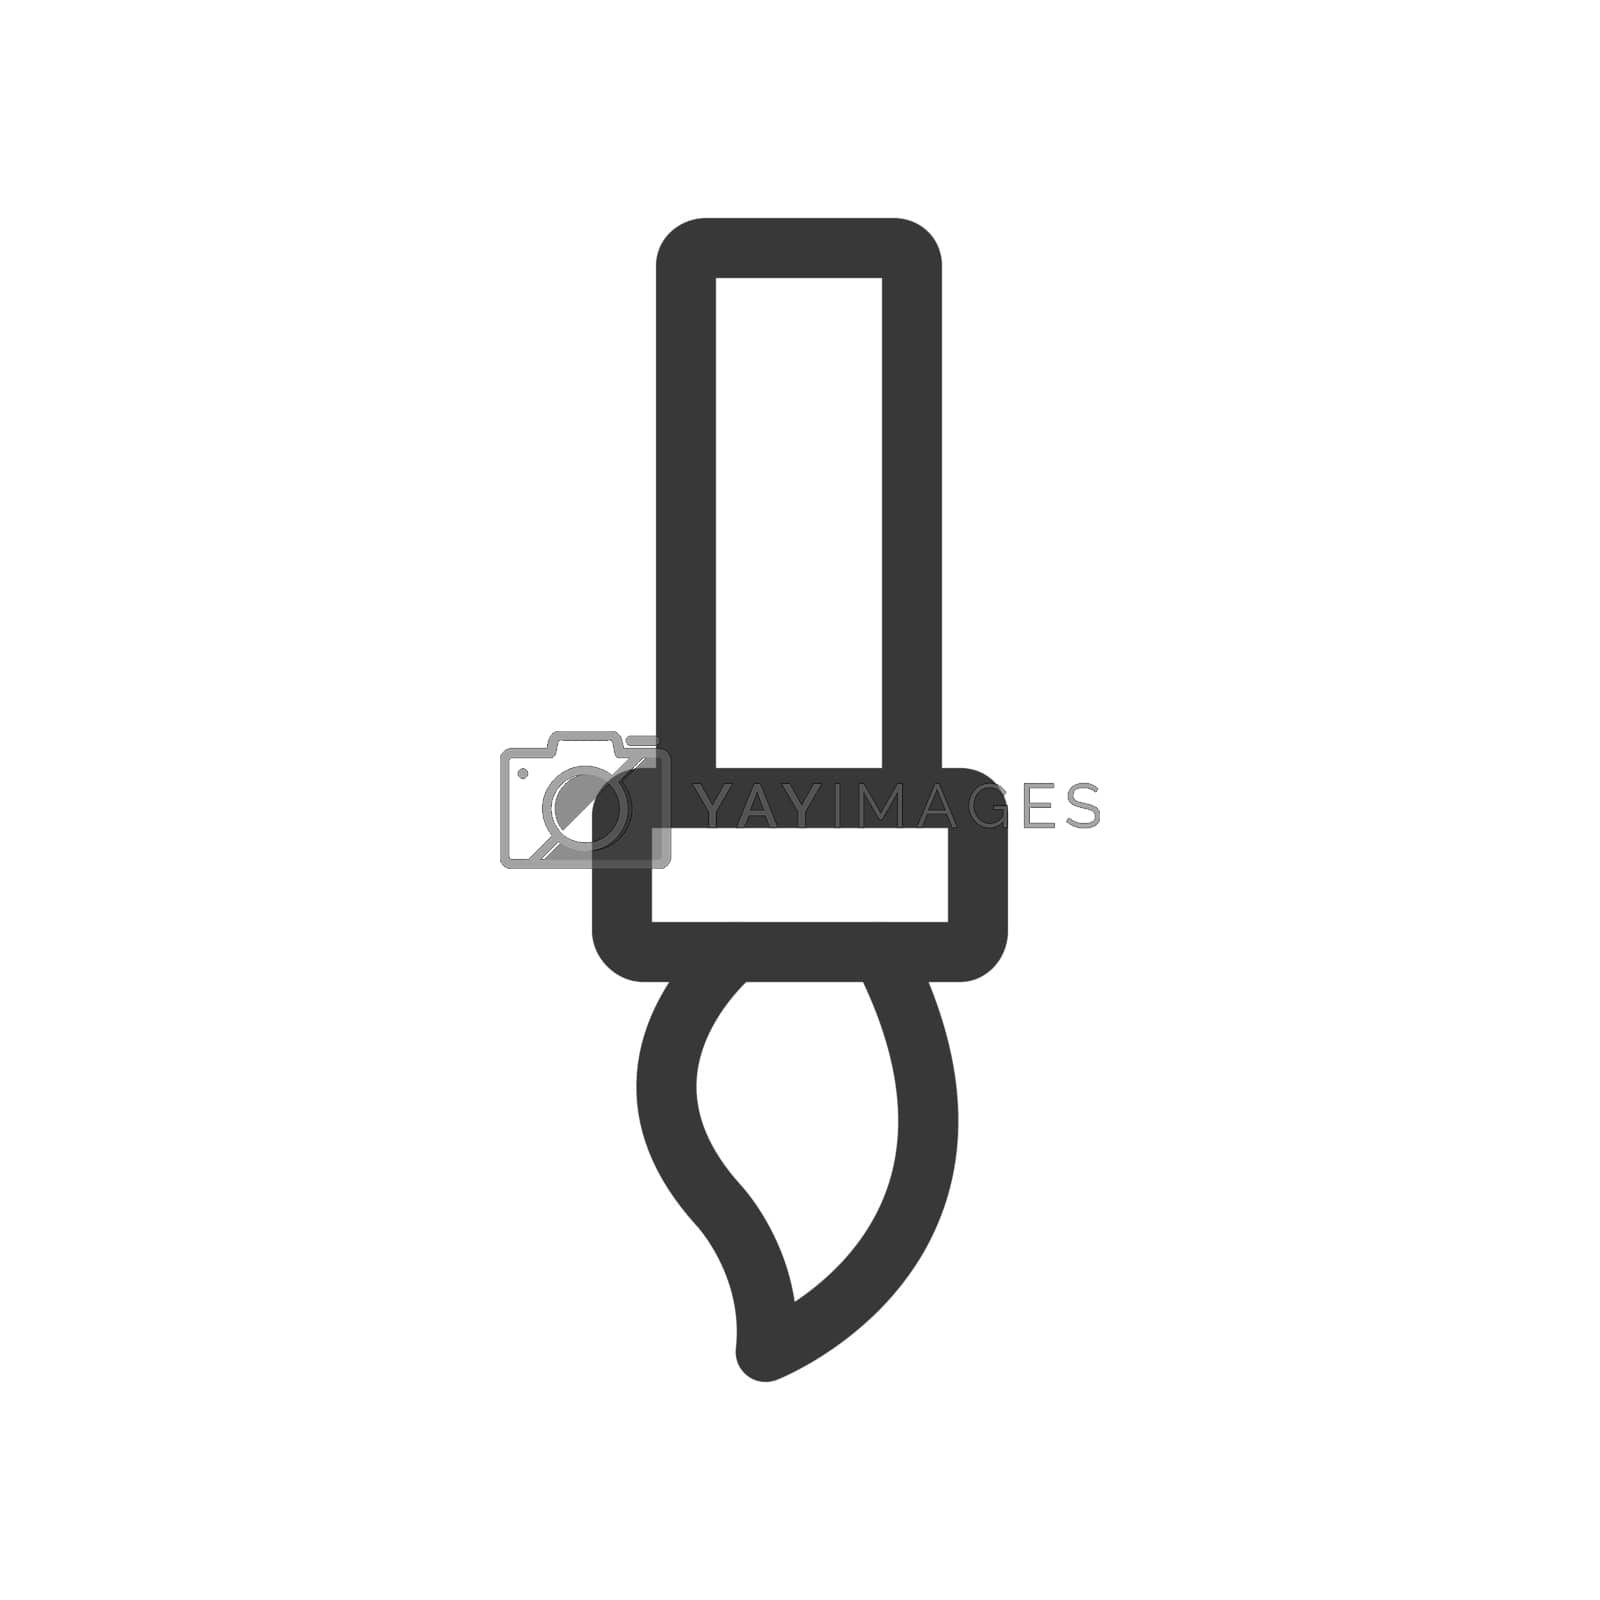 Royalty free image of paintbrush Stationery Office tool line icon by PAPAGraph